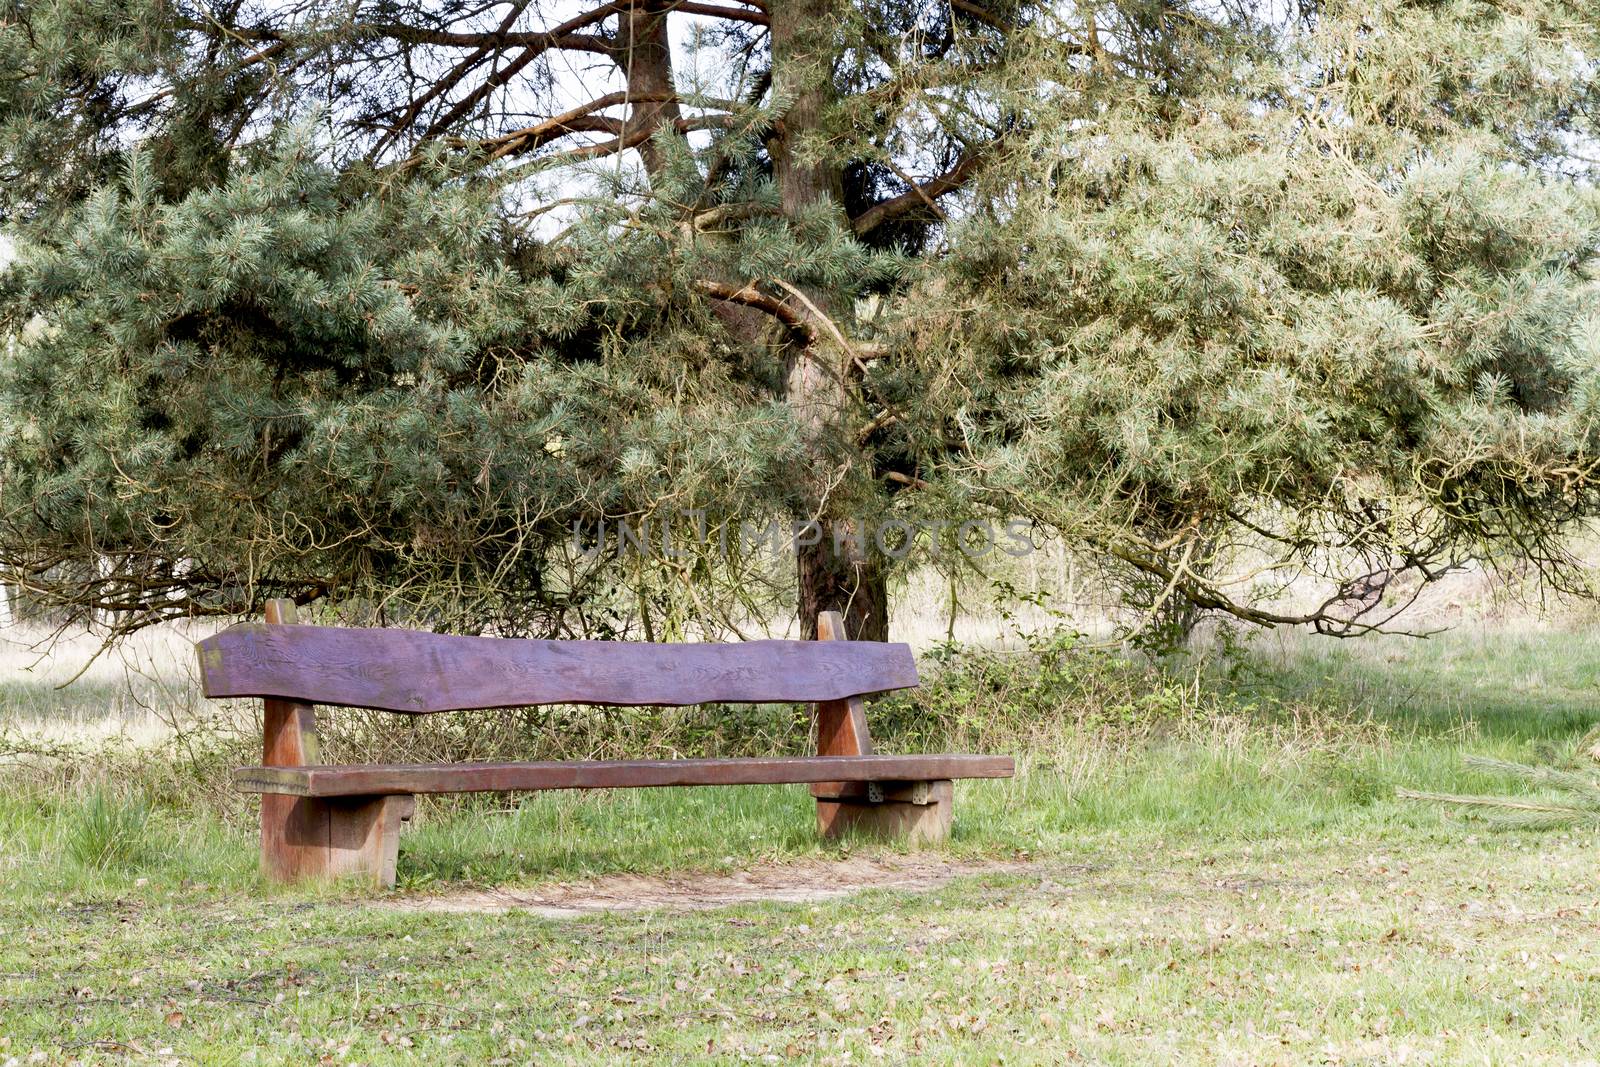 outdoor wooden bench with tree in background